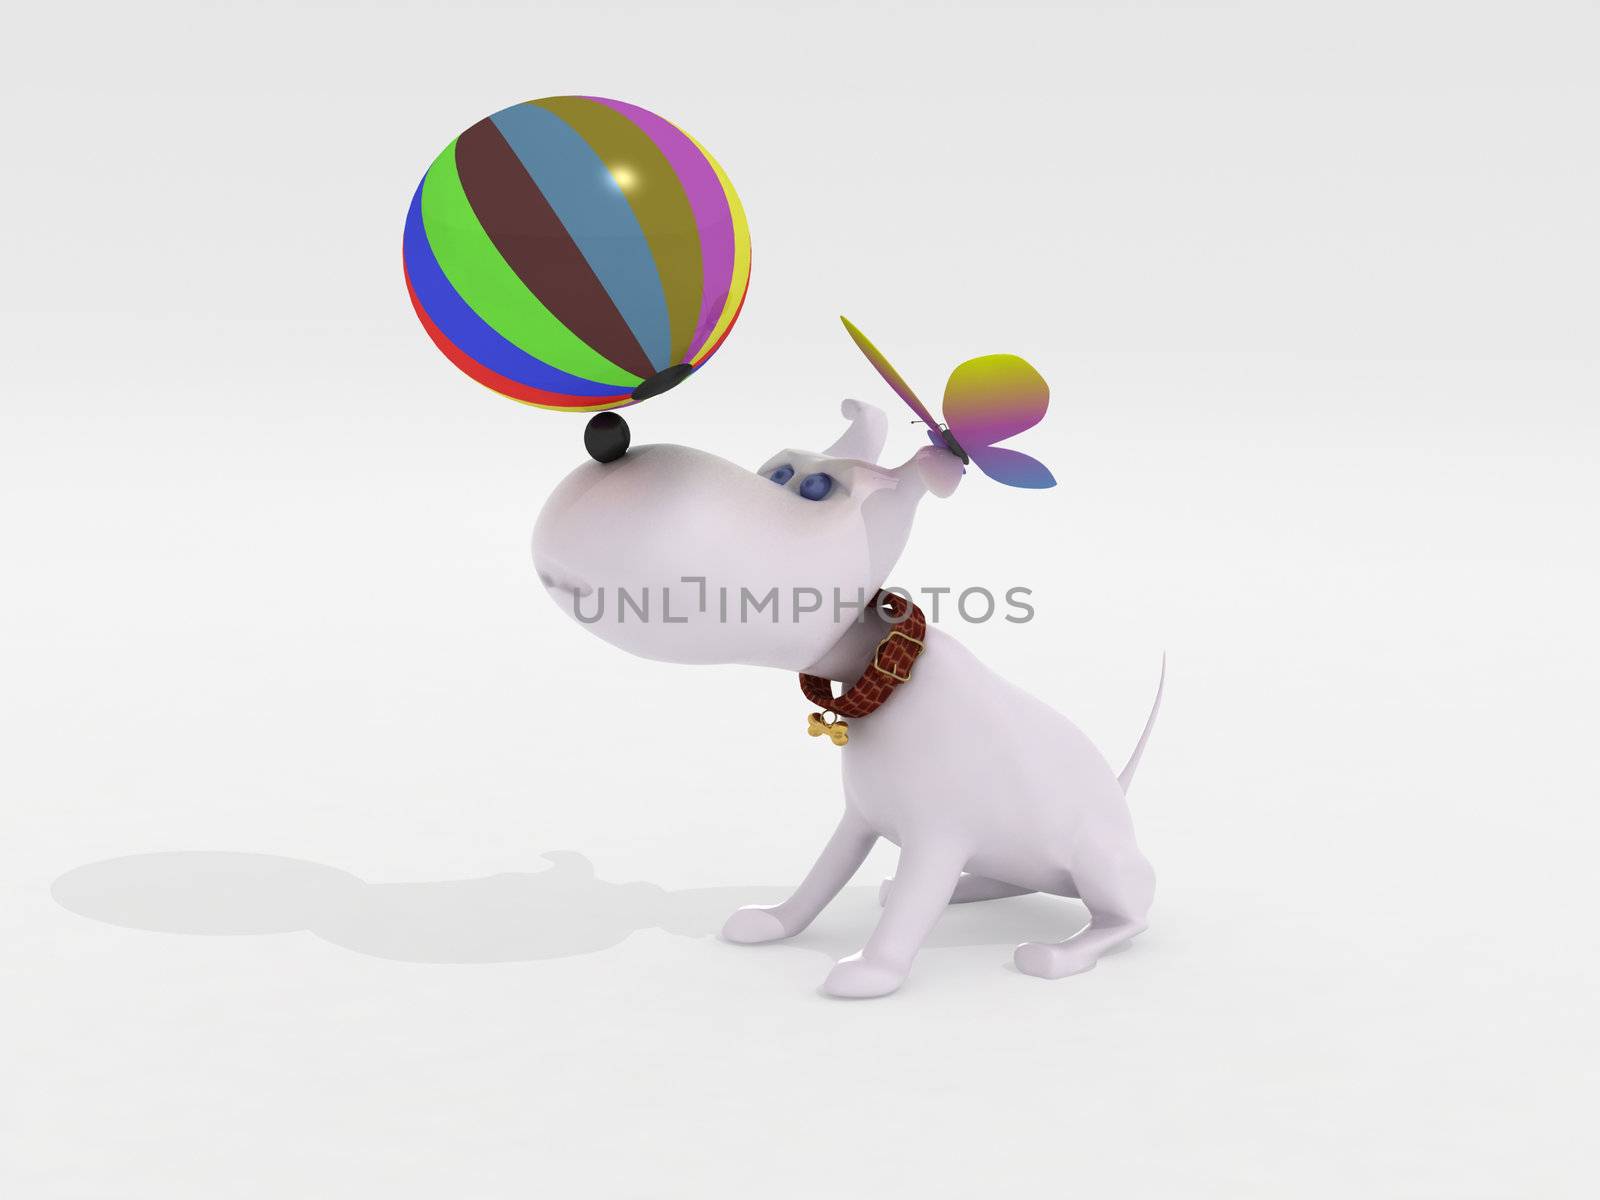 Dog, ball and butterfly on a white background